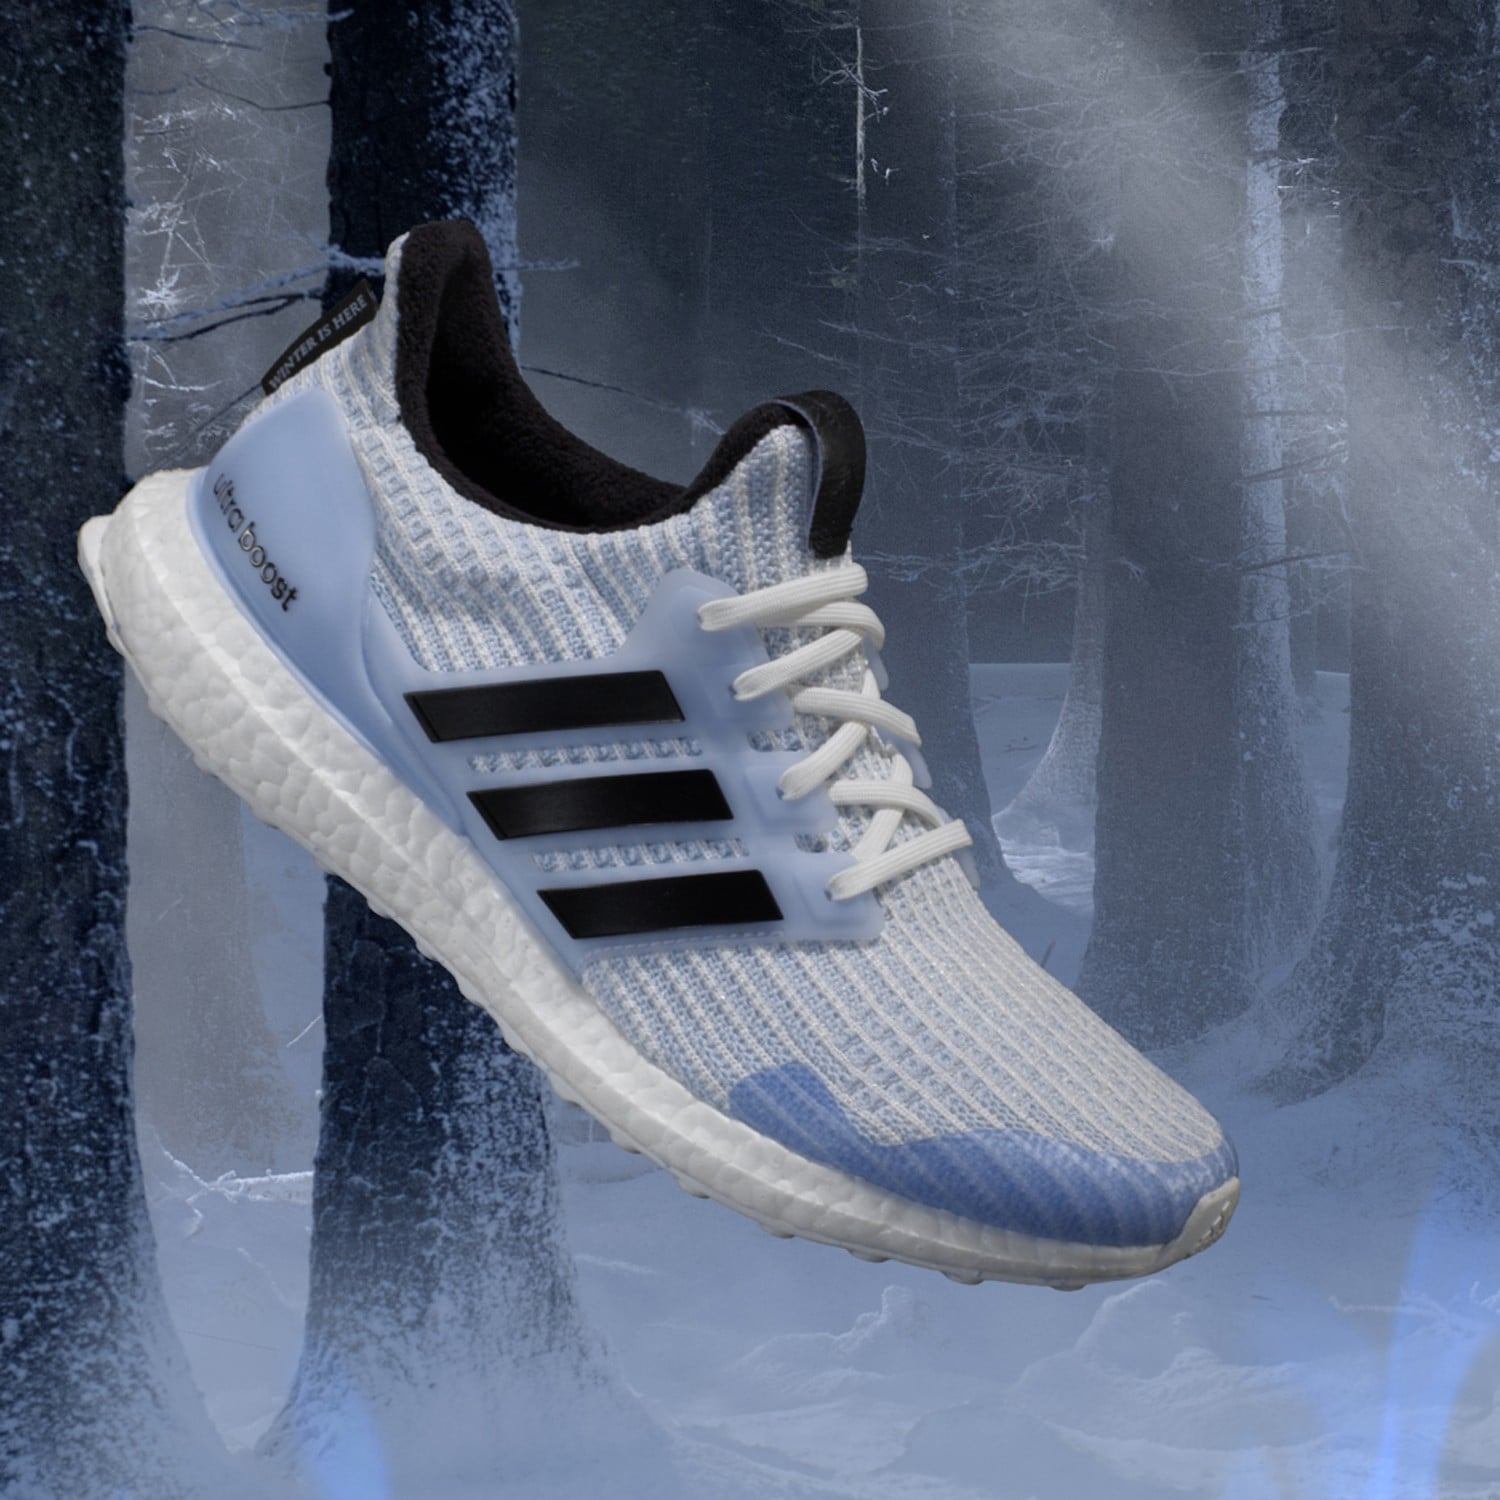 Adidas Game Of Thrones Shoes - HD Wallpaper 